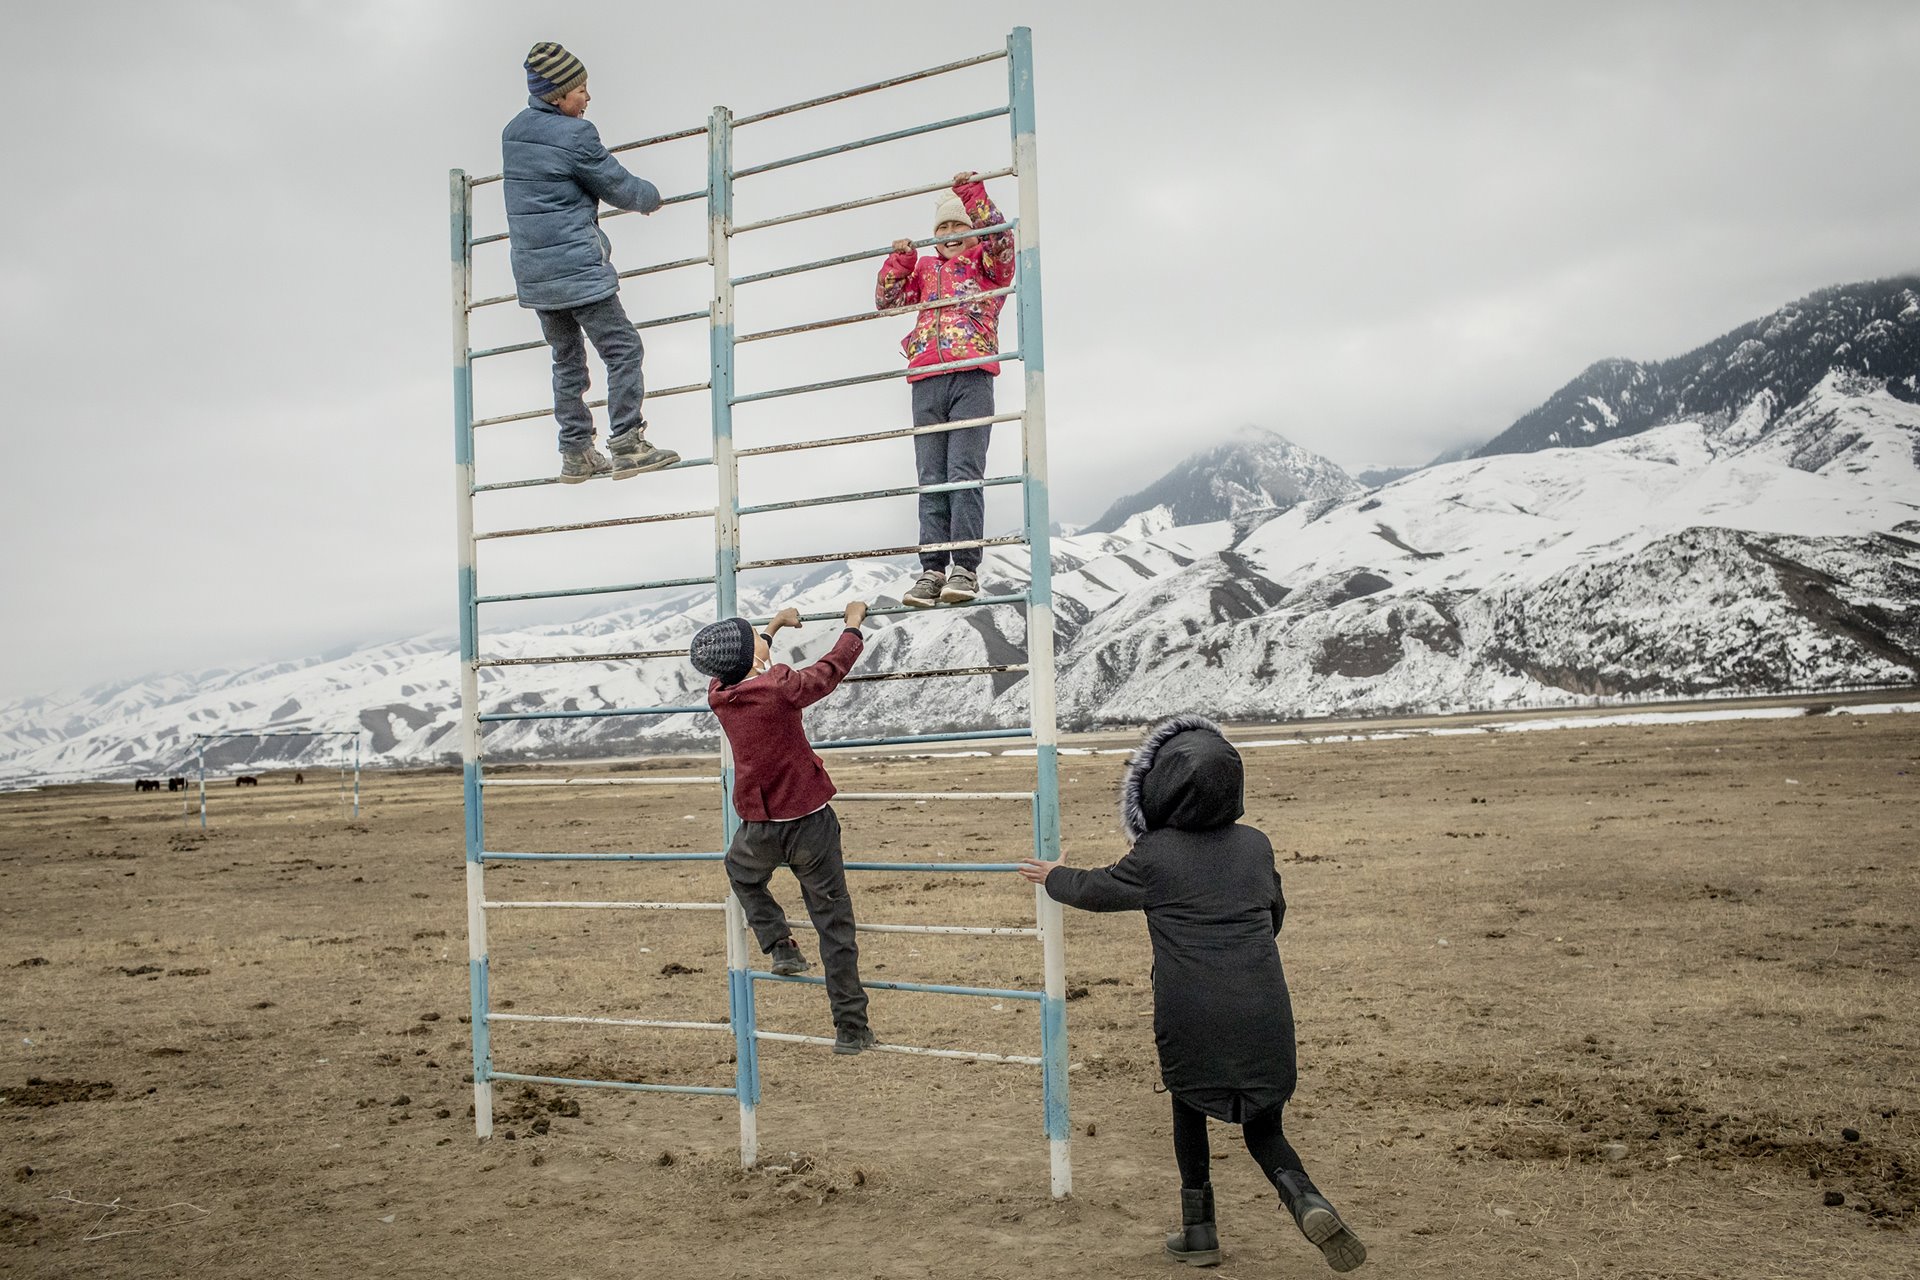 Children climb in an outdoor playground near the Naryn River, in Ak-Kyya, Kyrgyzstan. The Naryn, which feeds into the Syr Darya River, supplies hydroelectric power to the region.